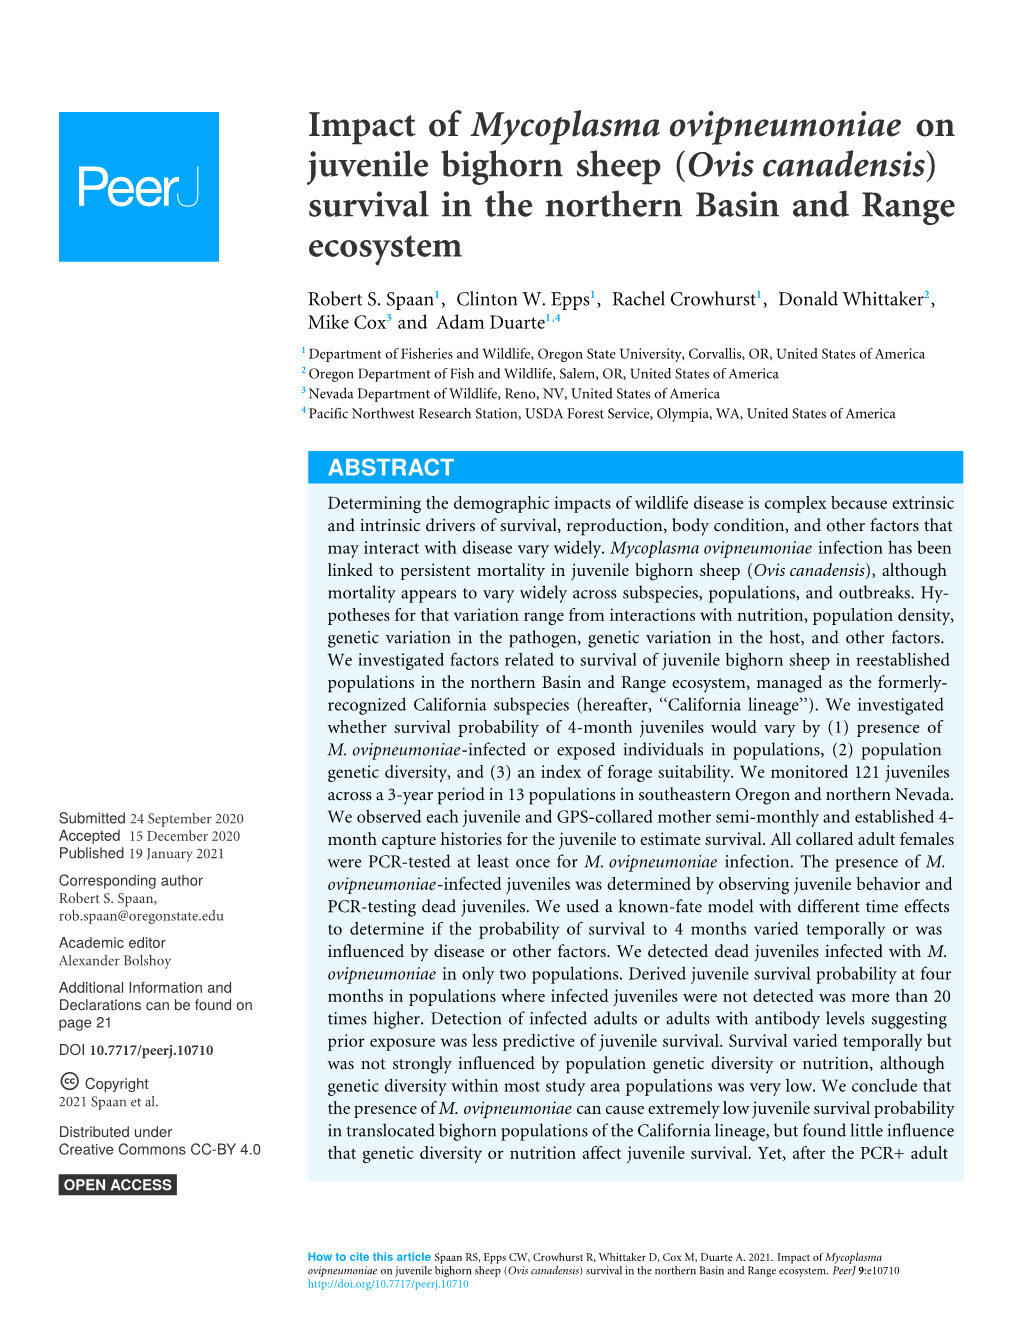 Ovis Canadensis) Survival in the Northern Basin and Range Ecosystem